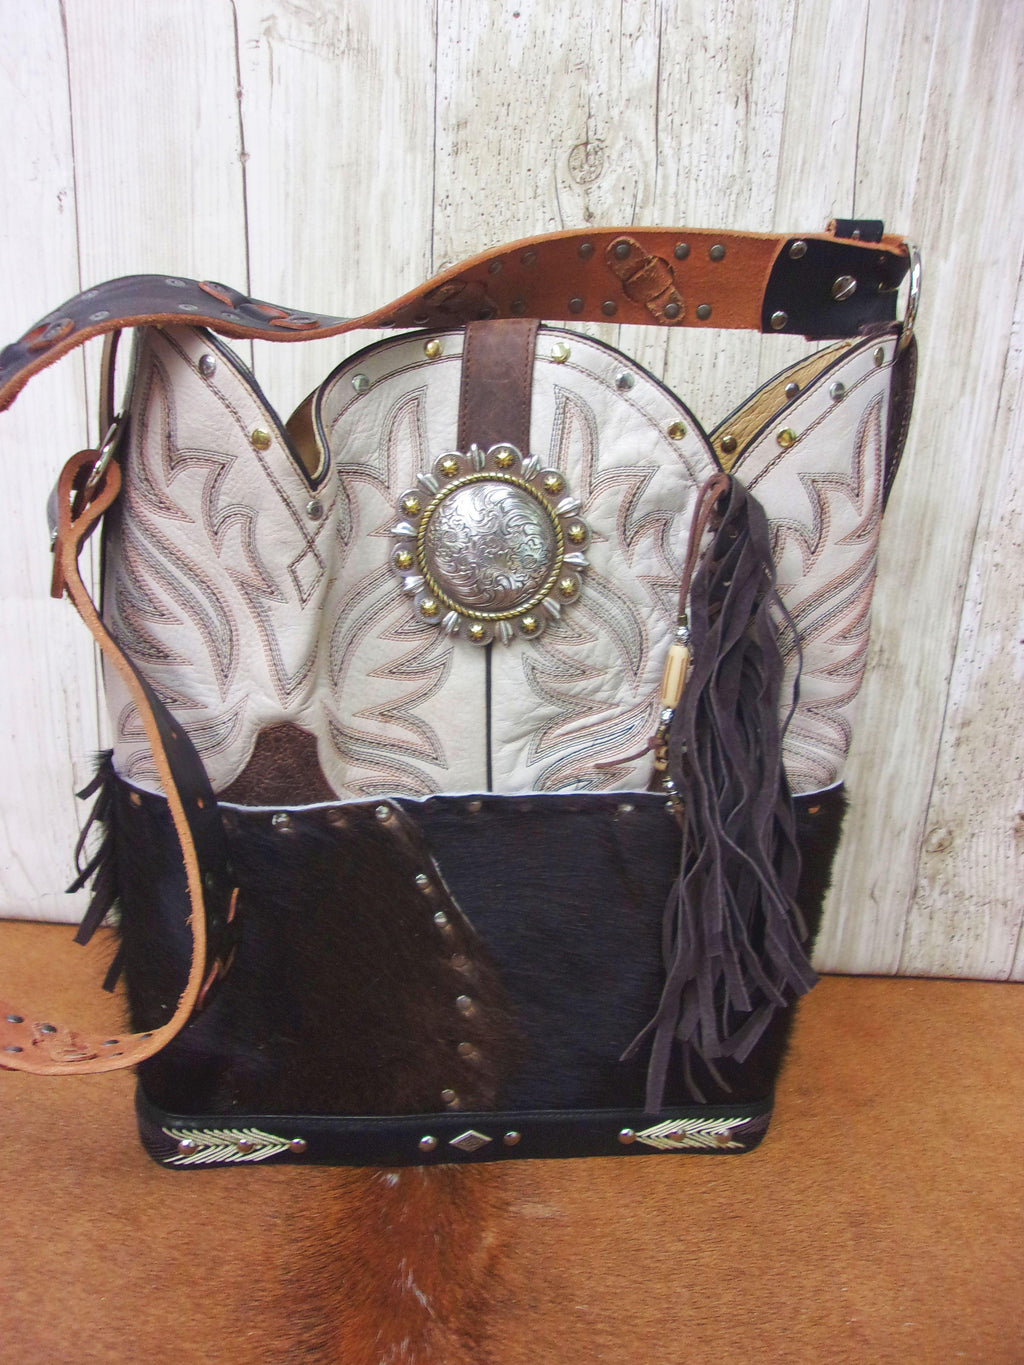 Leather Purse with Fringe - Cowboy Boot Purse with Fringe - Western Shoulder Bag with Fringe TS304 cowboy boot purses, western fringe purse, handmade leather purses, boot purse, handmade western purse, custom leather handbags Chris Thompson Bags